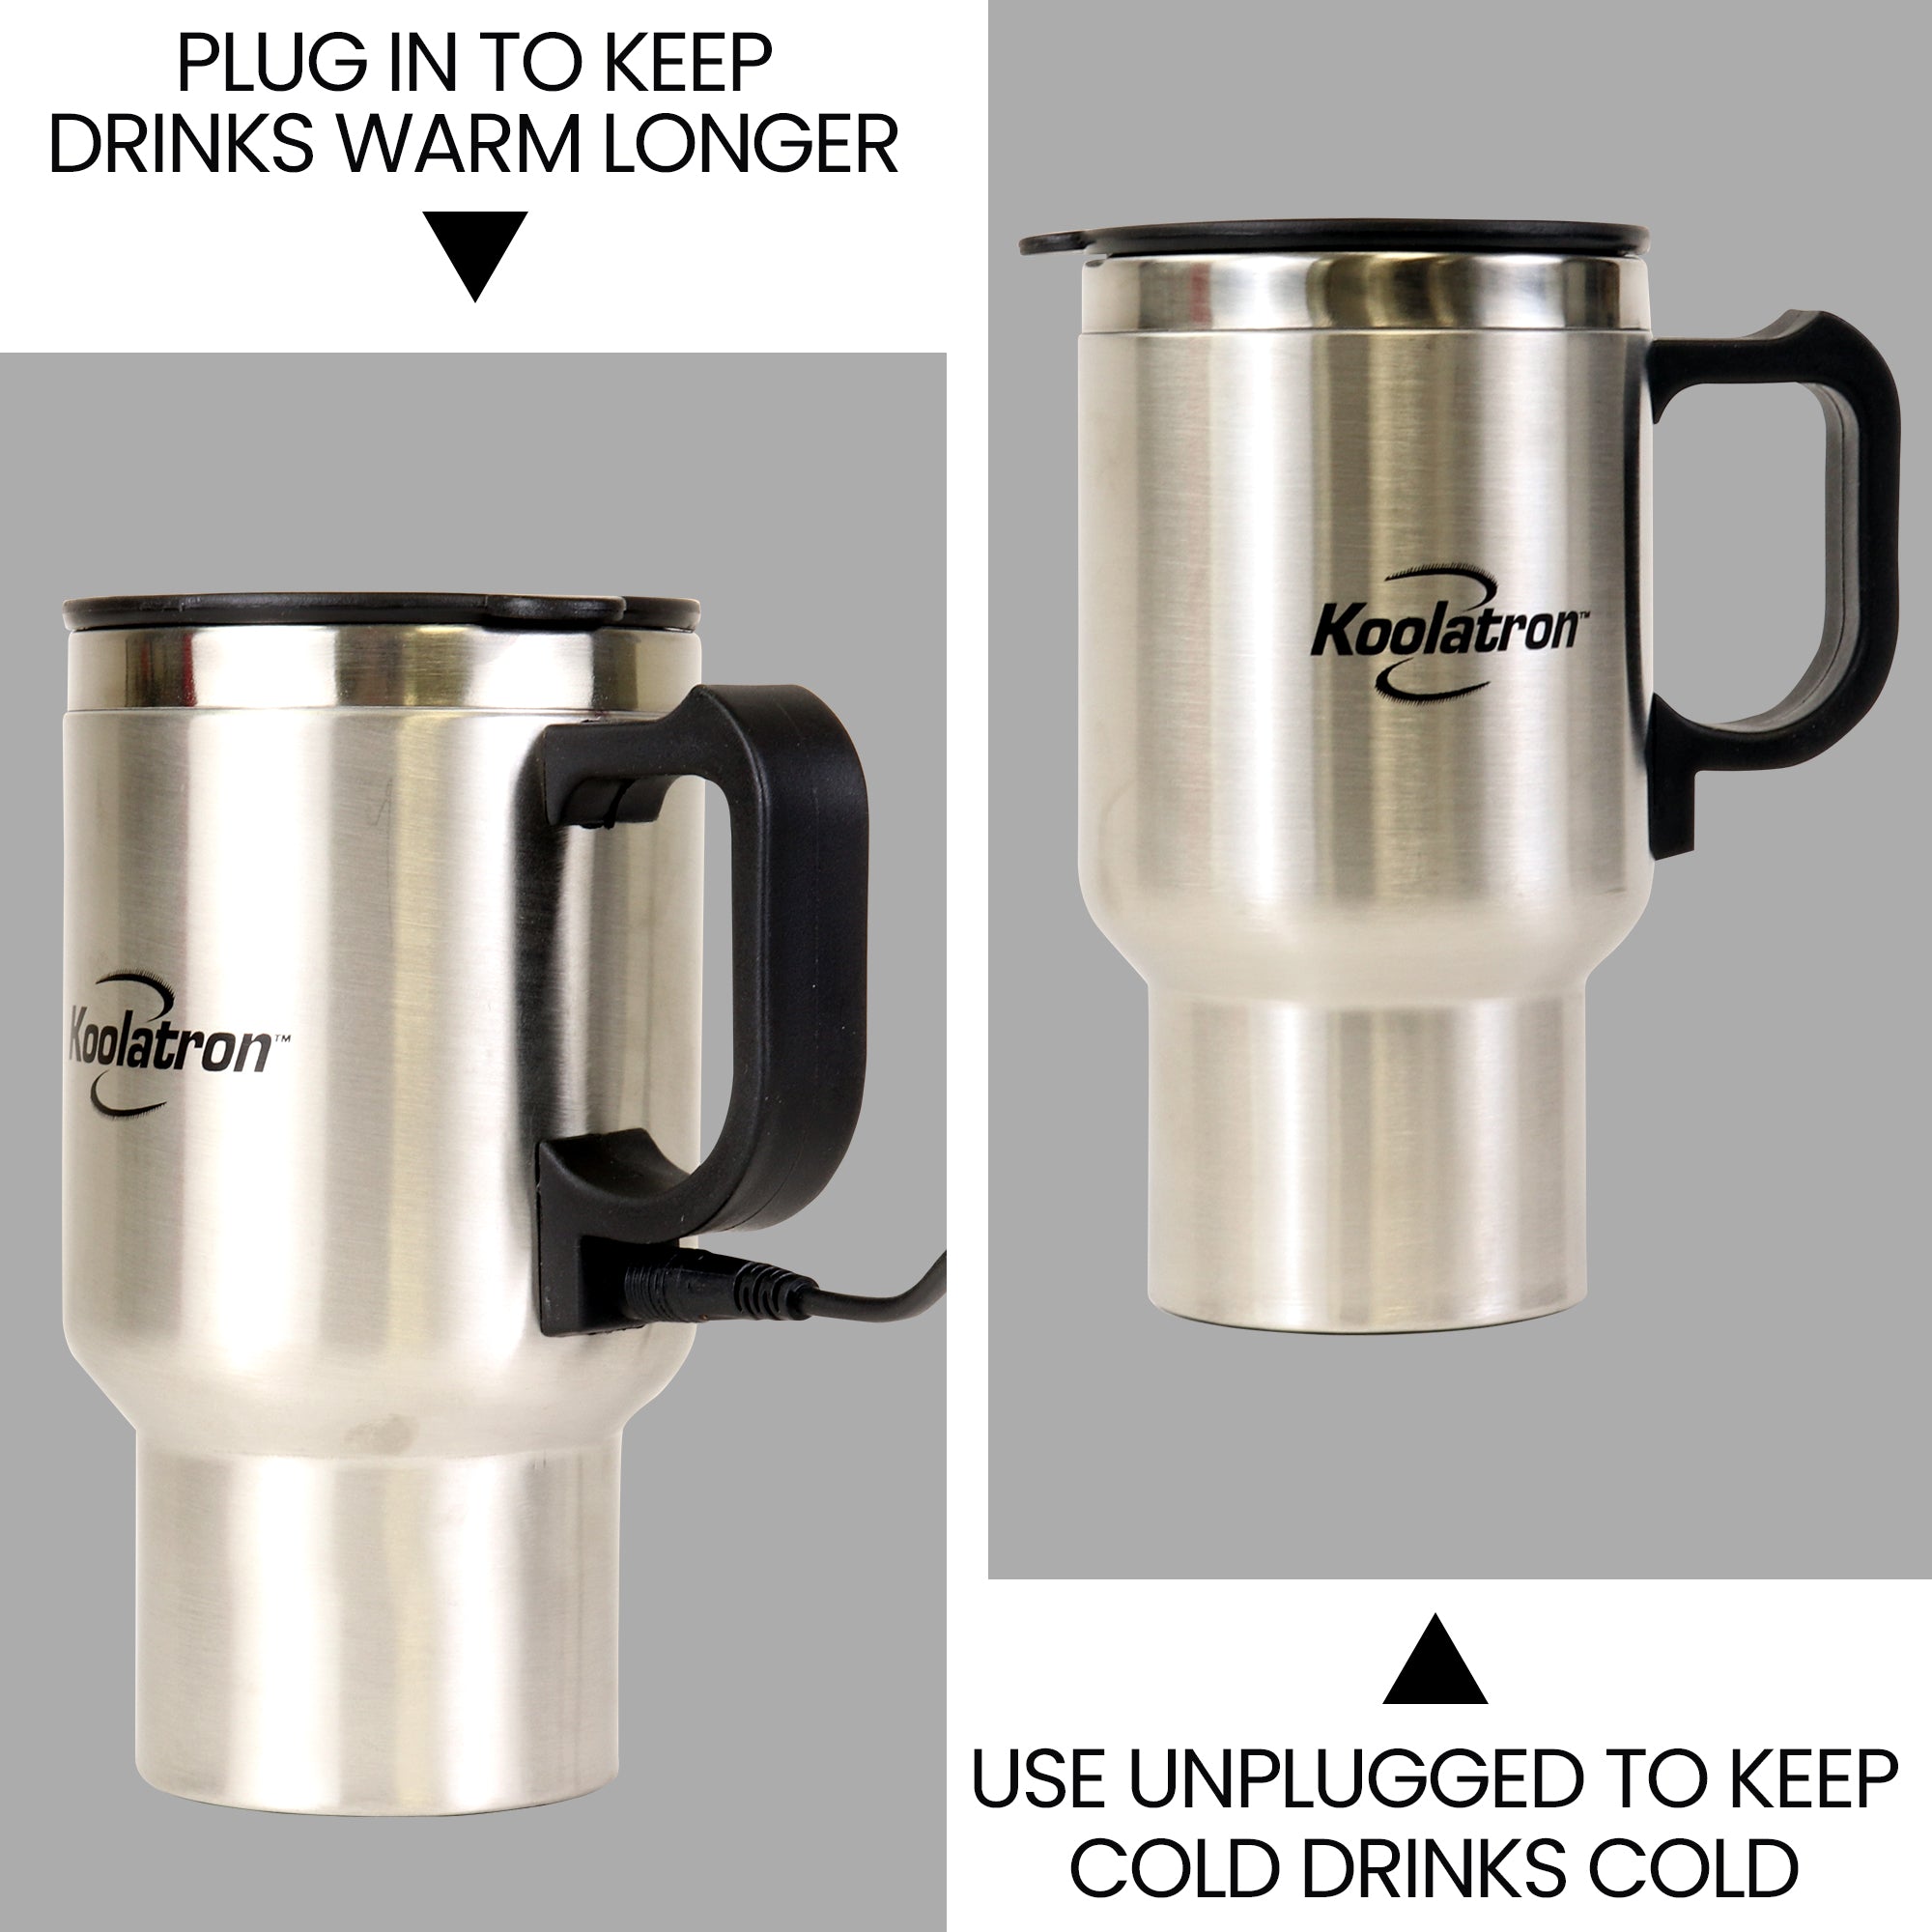 On the left is a product shot of the stainless steel insulated travel mug with heater with power cord plugged in on a gray background and text above reading, "Plug in to keep drinks warm longer." On the right is a product shot of the insulated travel mug without power cord on a gray background and text below reading, "Use unplugged to keep cold drinks cold"